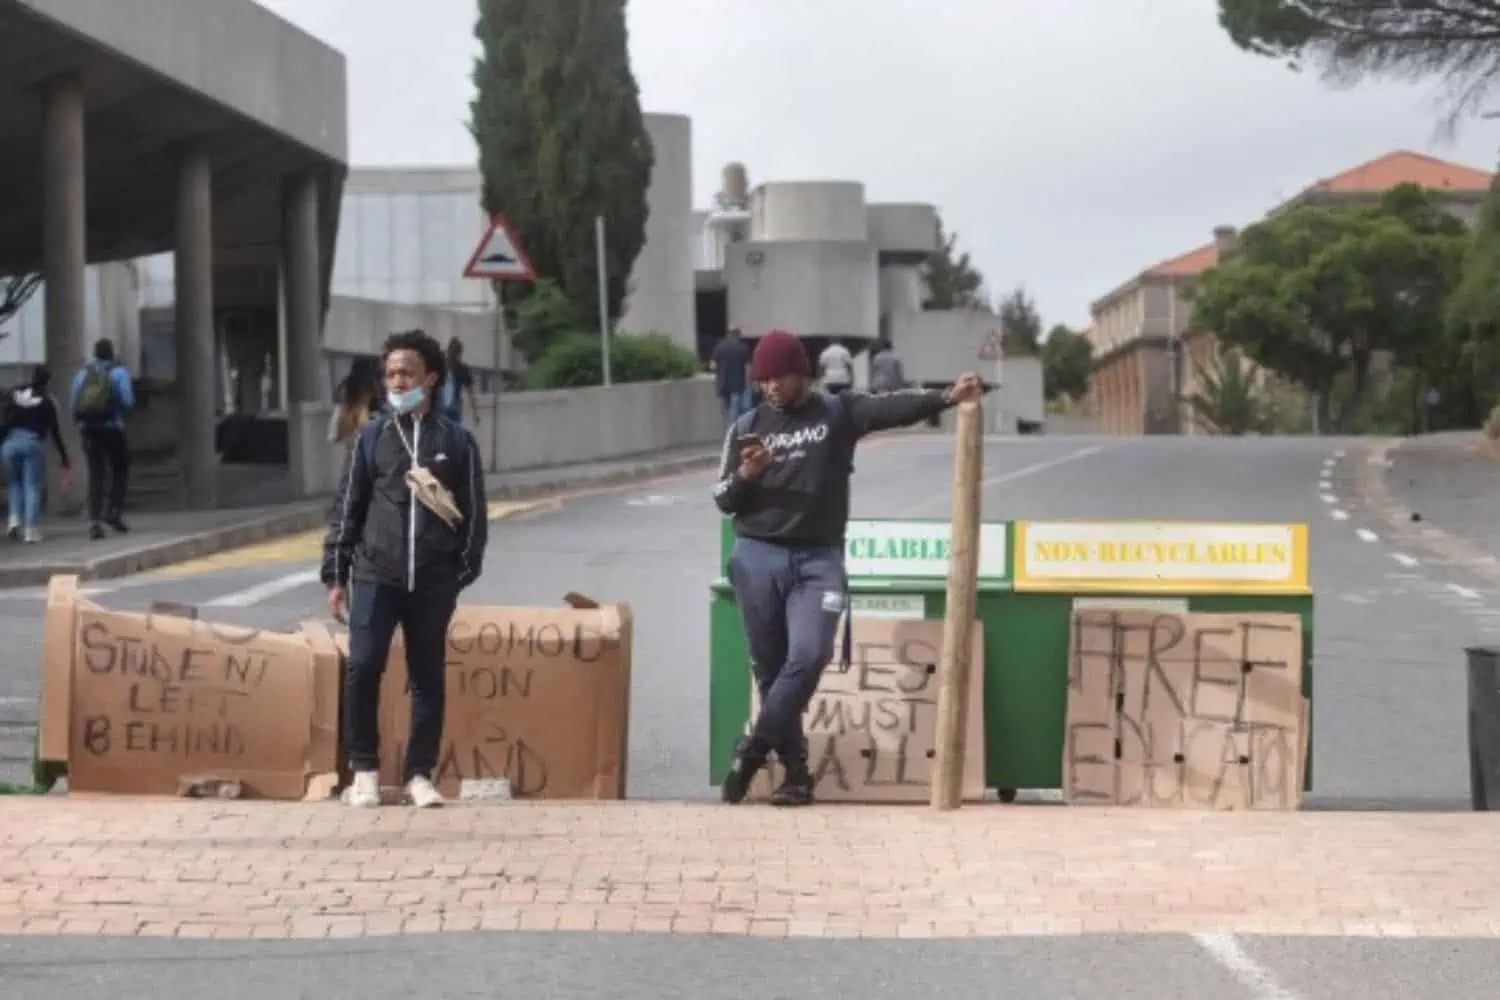 TODAY: South Africa's Top News for 17 February 2022 - Students protest at UCT